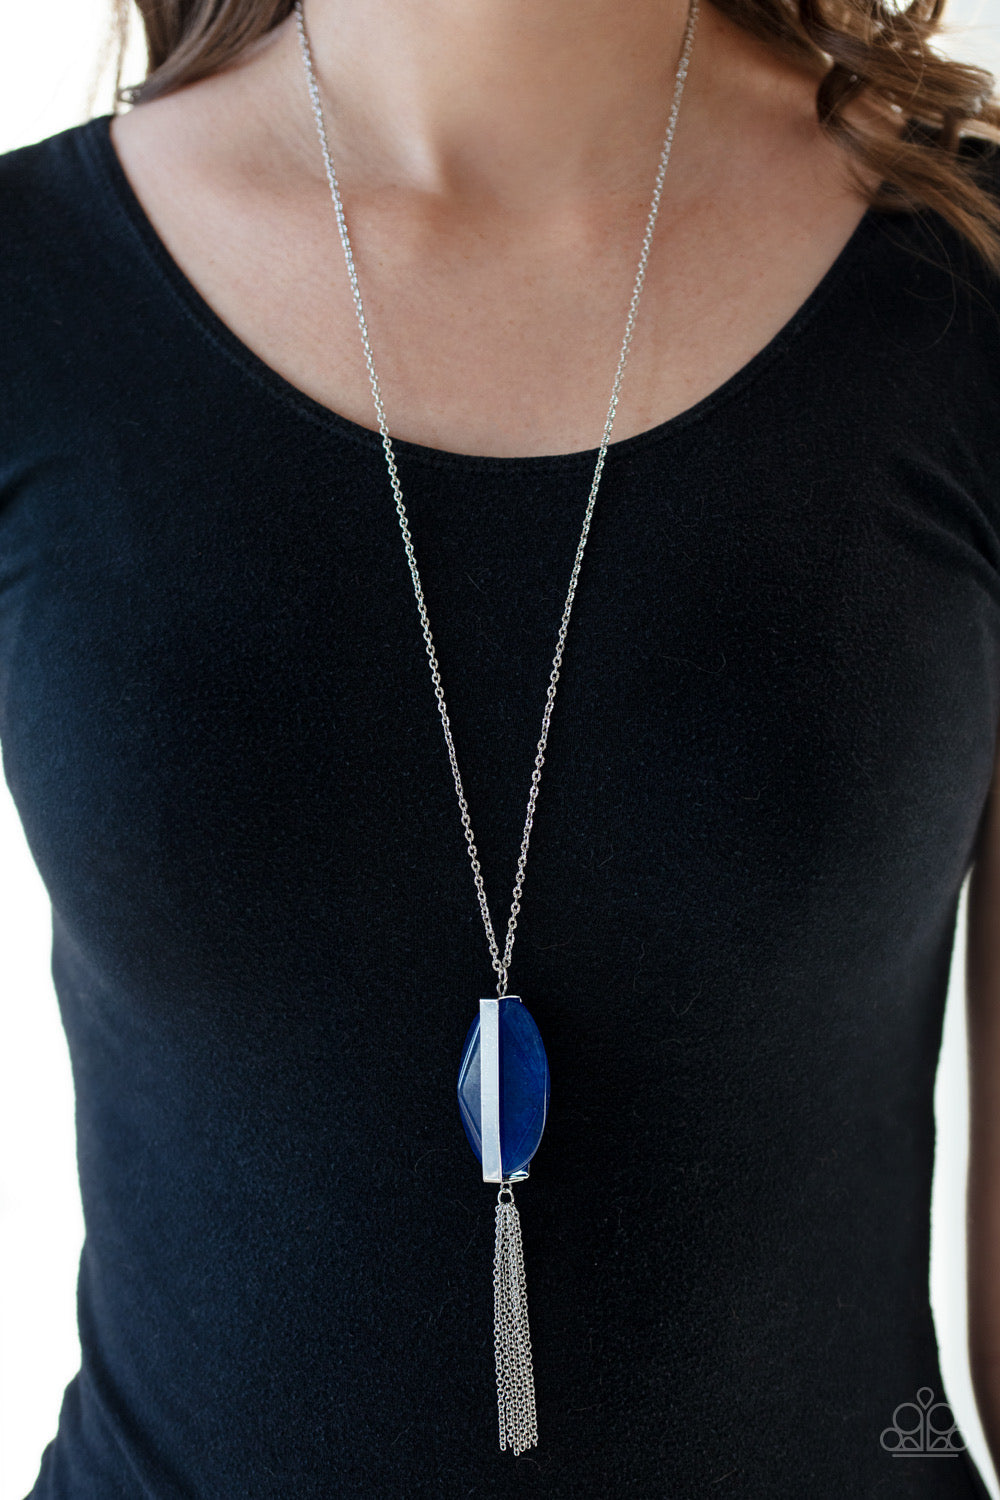 Tranquility Trend - Blue Necklace 1254N